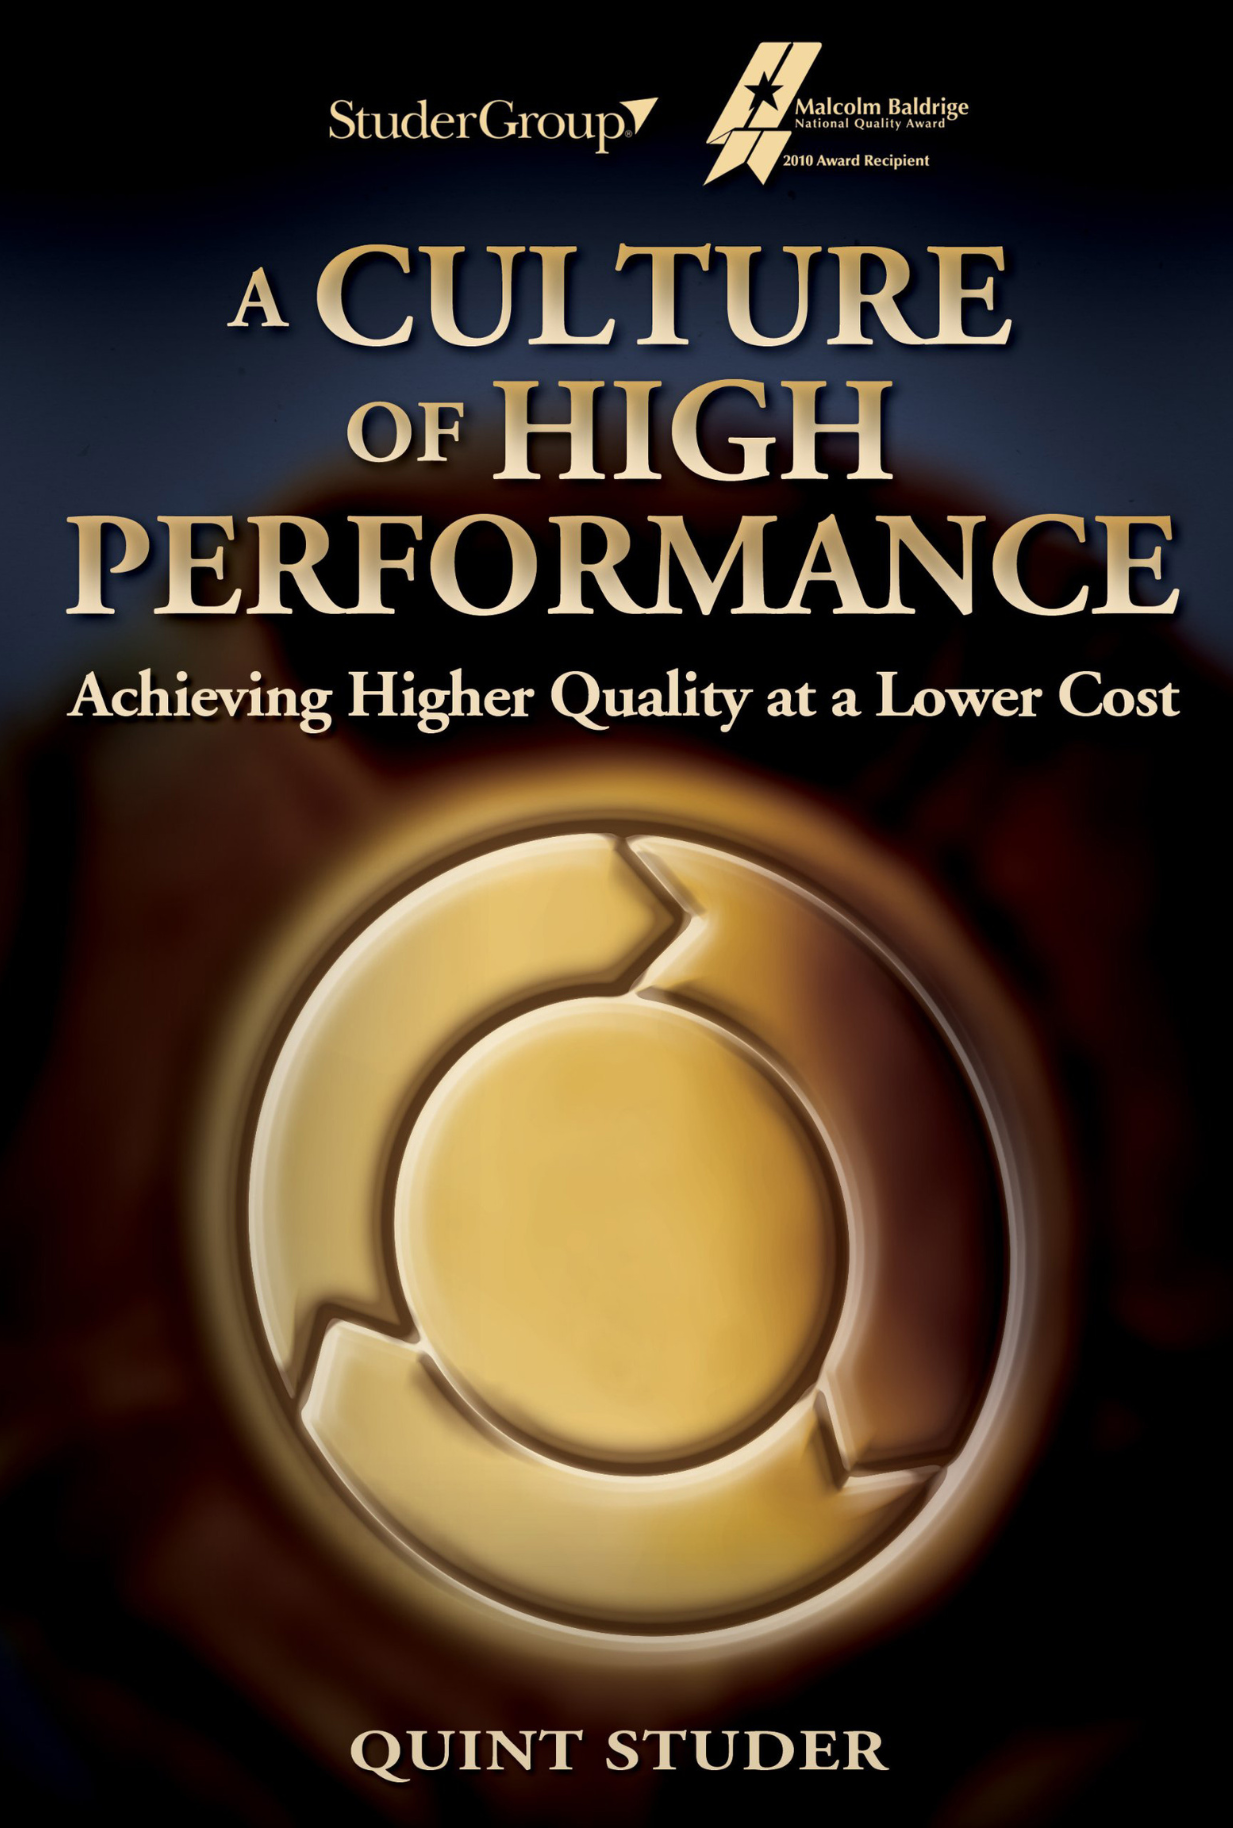 A Culture of High Performance by Quint Studer